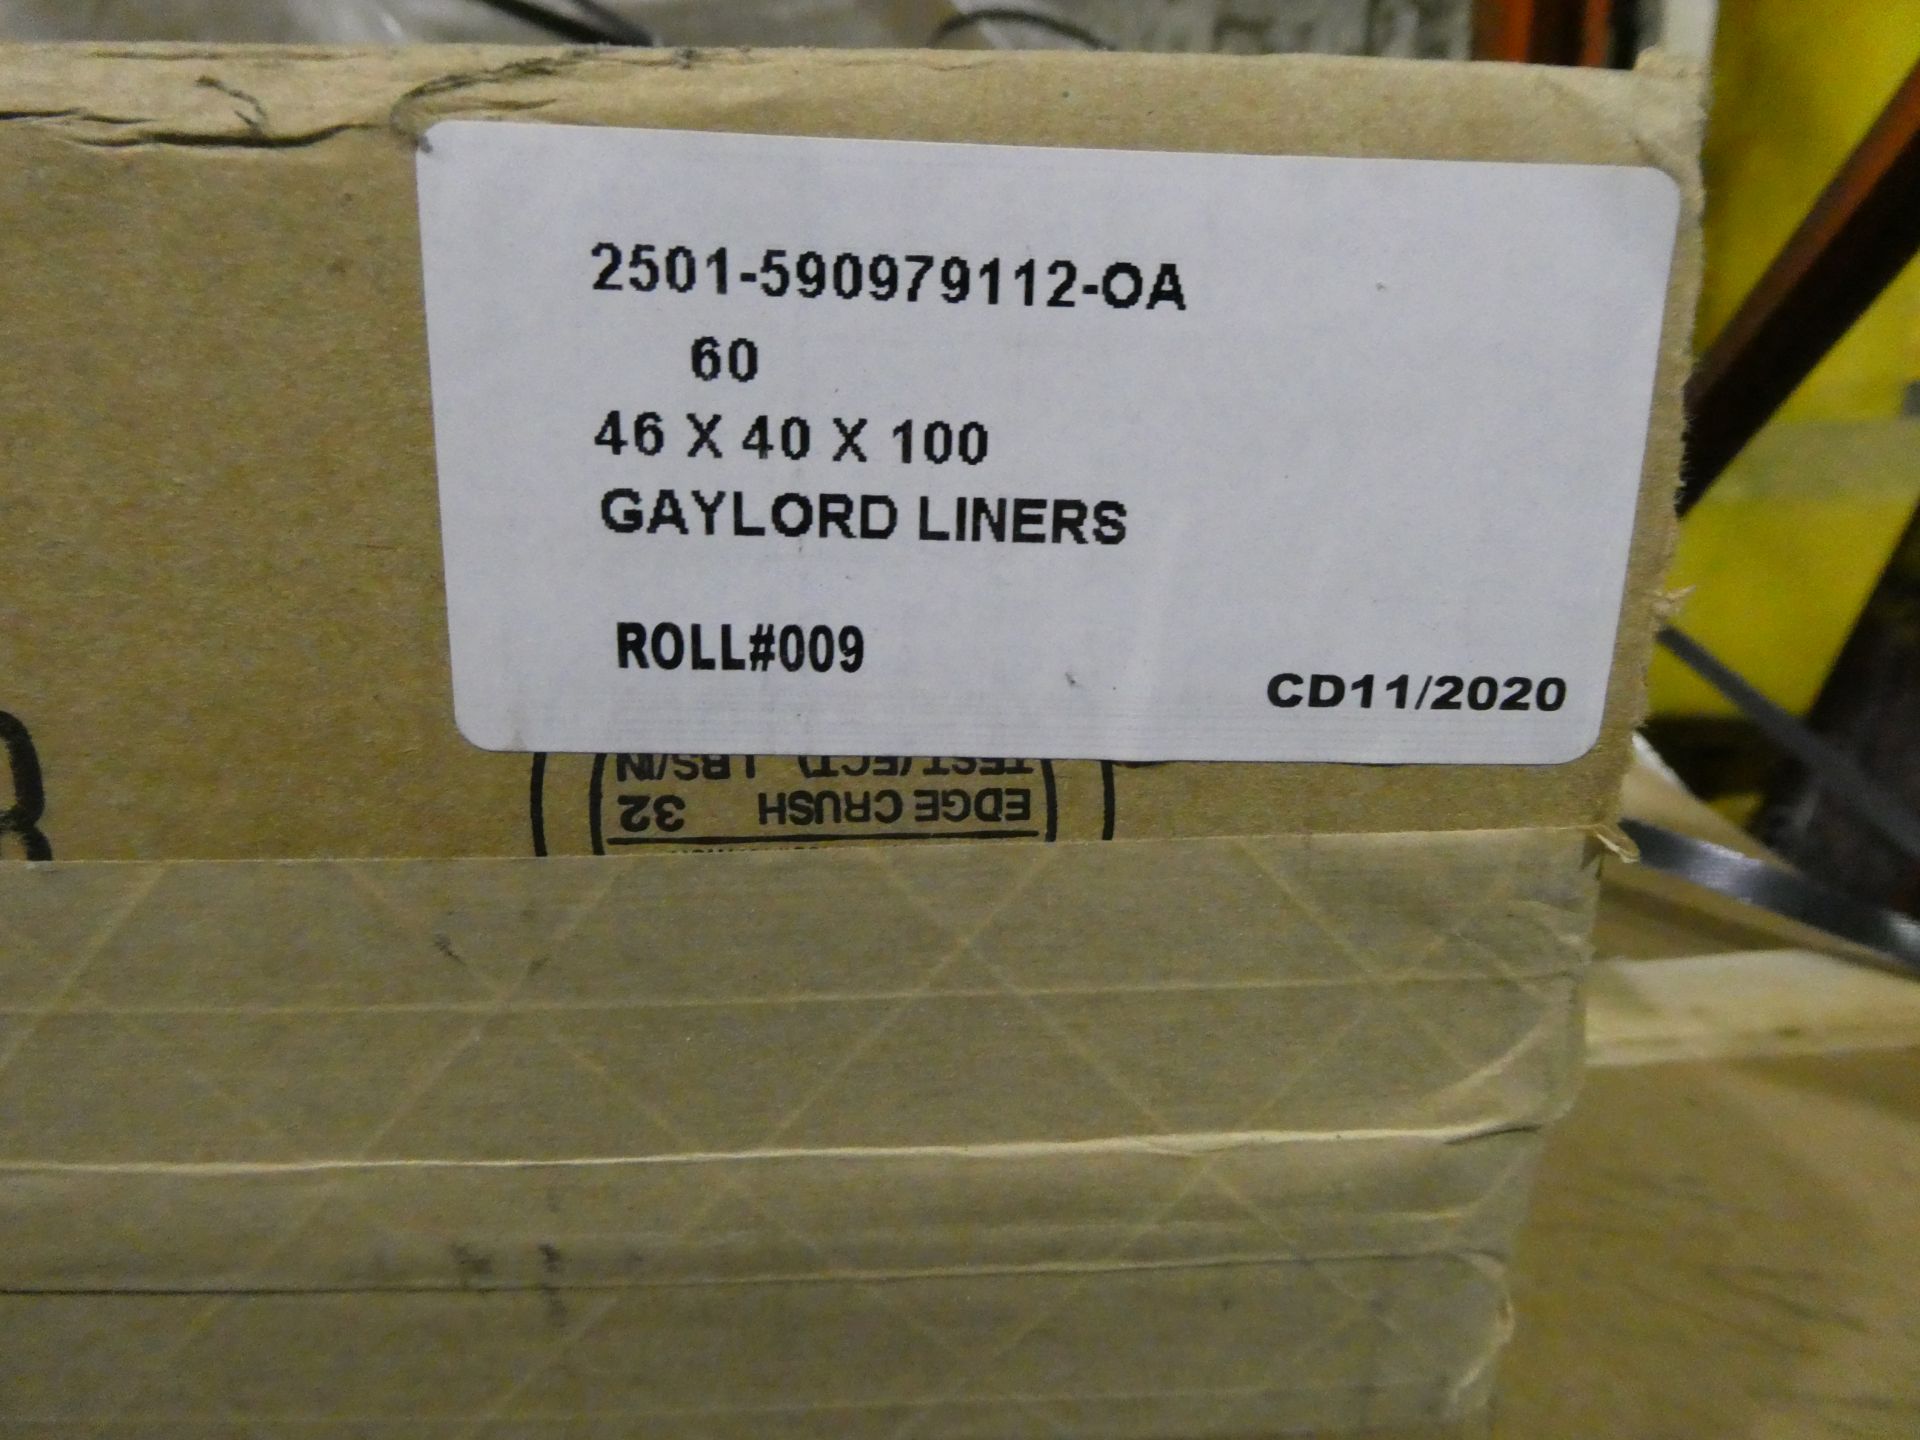 10 Rolls of Gaylord Liners - Image 2 of 2